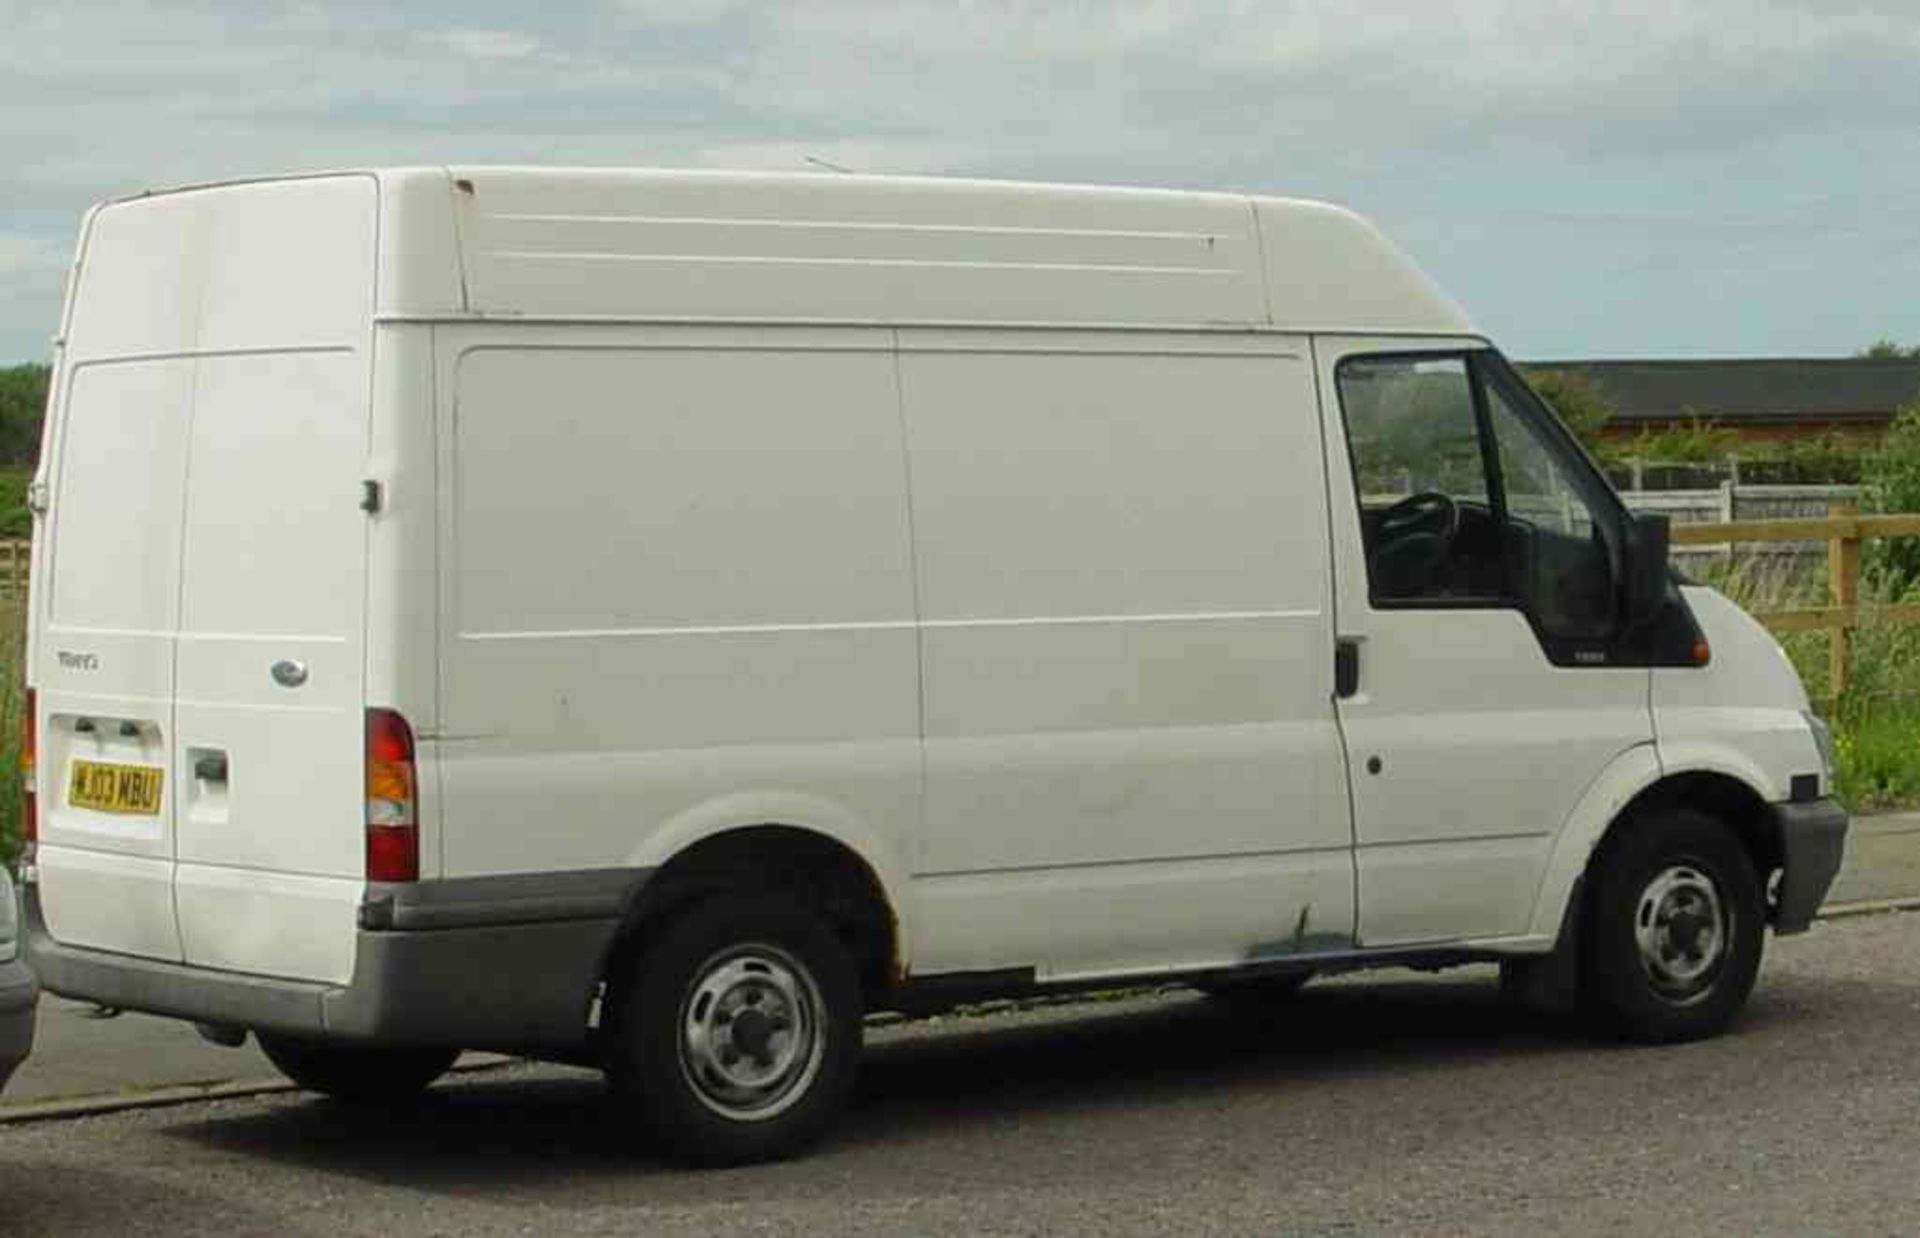 TRANSIT VAN 2003 - MJ03 MBU - 1988CC DIESEL MOT JUNE 2016 DRIVES VERY WELL DOES WANT A GOOD CLEANUP, - Image 7 of 7